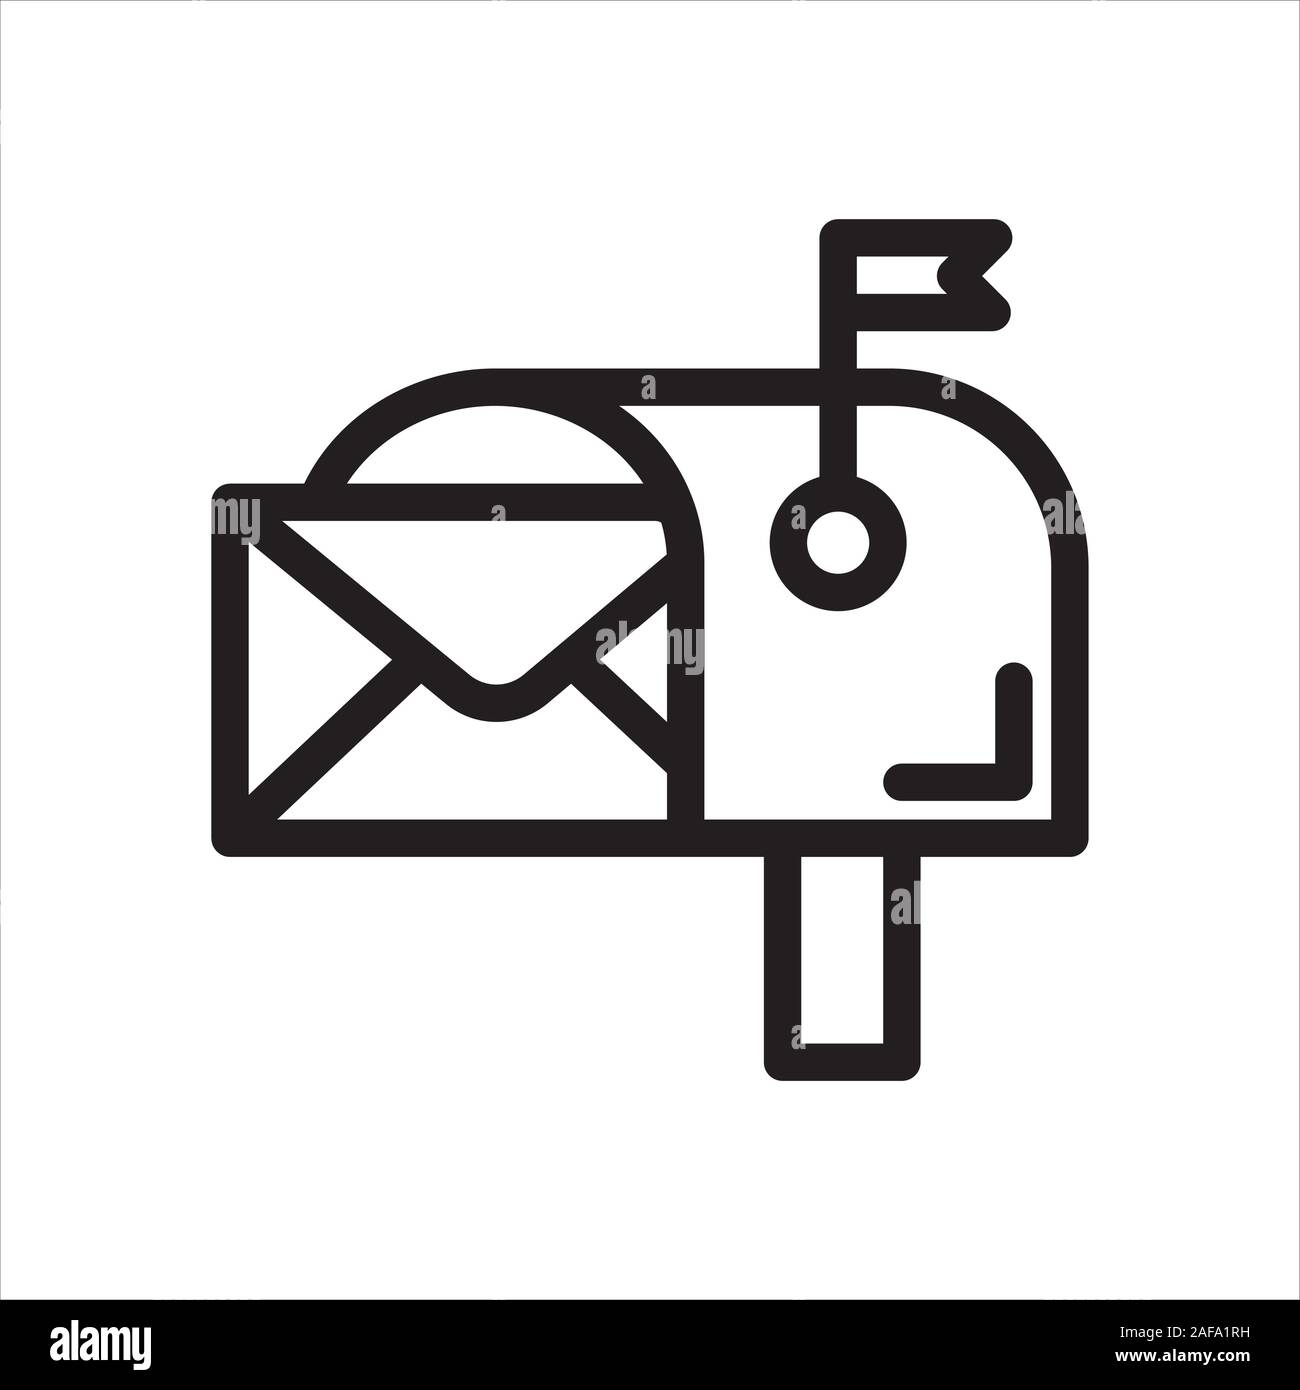 Email, inbox, mailbox icon Stock Vector